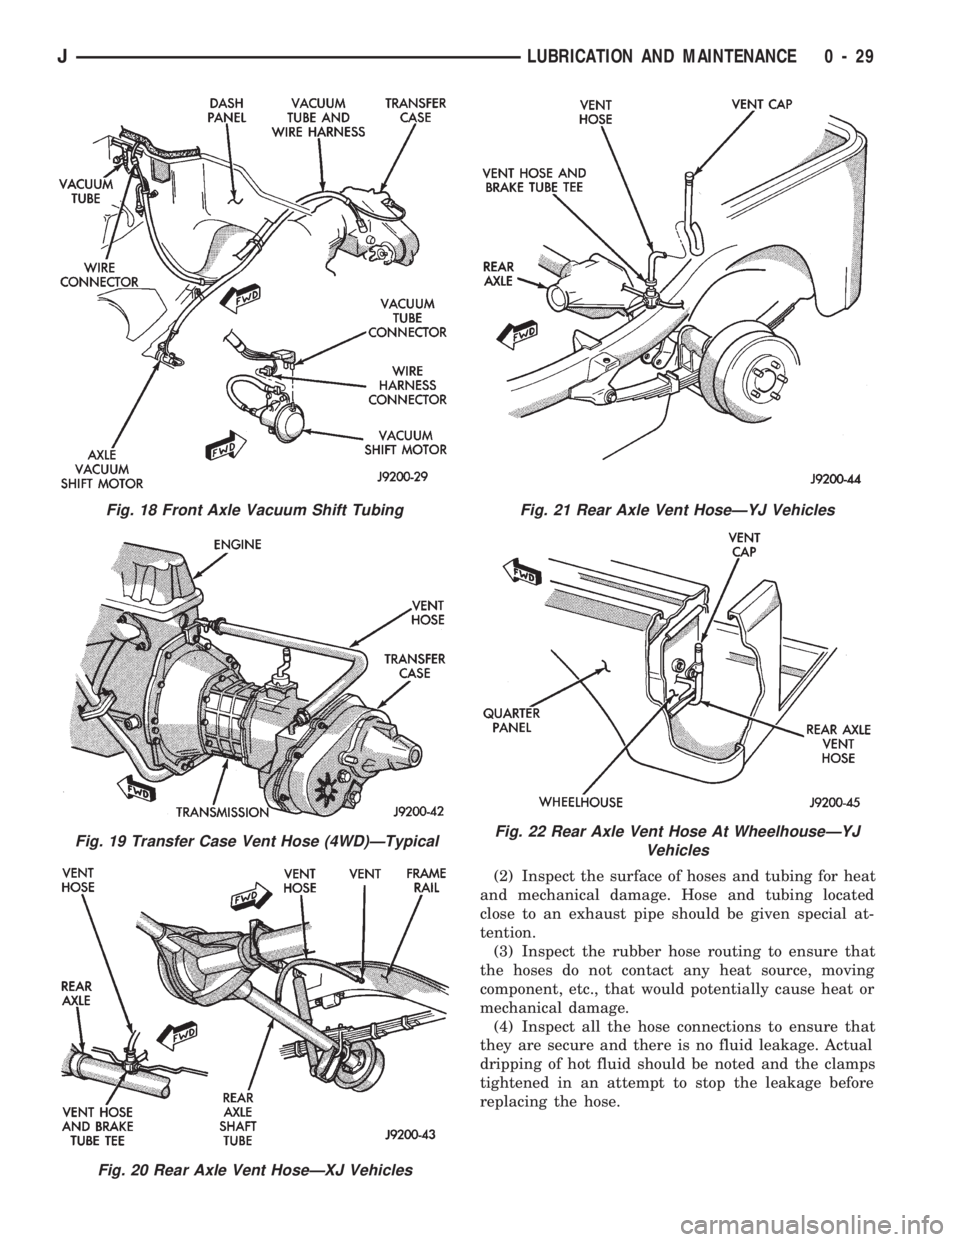 JEEP WRANGLER 1994  Owners Manual Fig. 19 Transfer Case Vent Hose (4WD)ÐTypical
Fig. 20 Rear Axle Vent HoseÐXJ Vehicles
Fig. 21 Rear Axle Vent HoseÐYJ Vehicles
Fig. 22 Rear Axle Vent Hose At WheelhouseÐYJ
Vehicles
JLUBRICATION AND